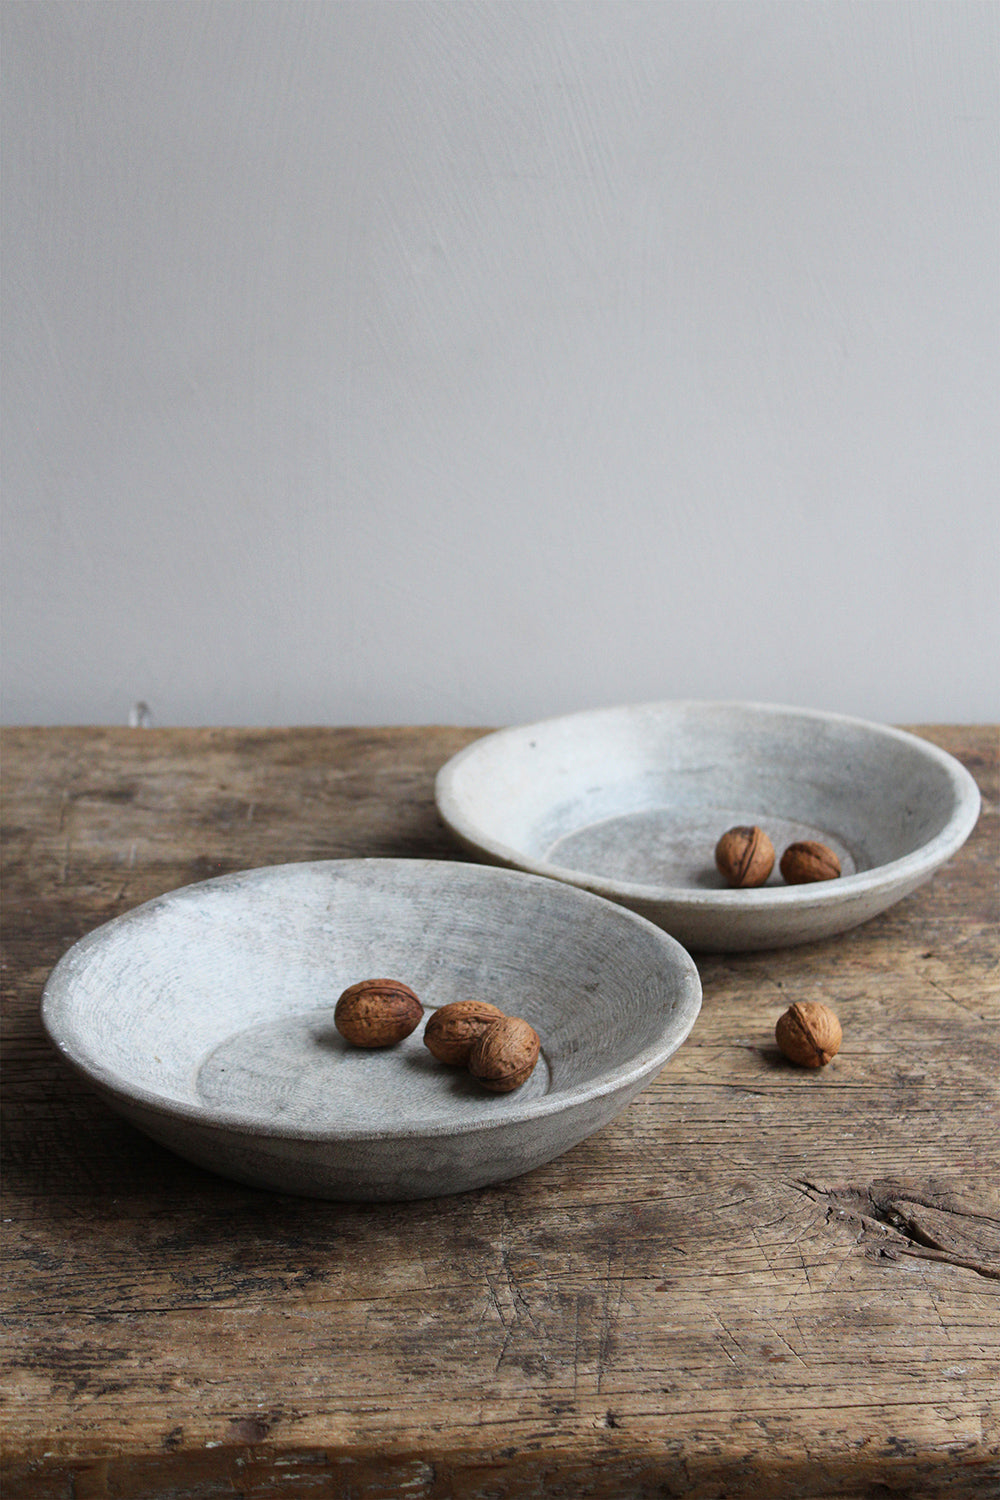 Two natural stone bowls on wooden table filled with walnuts.